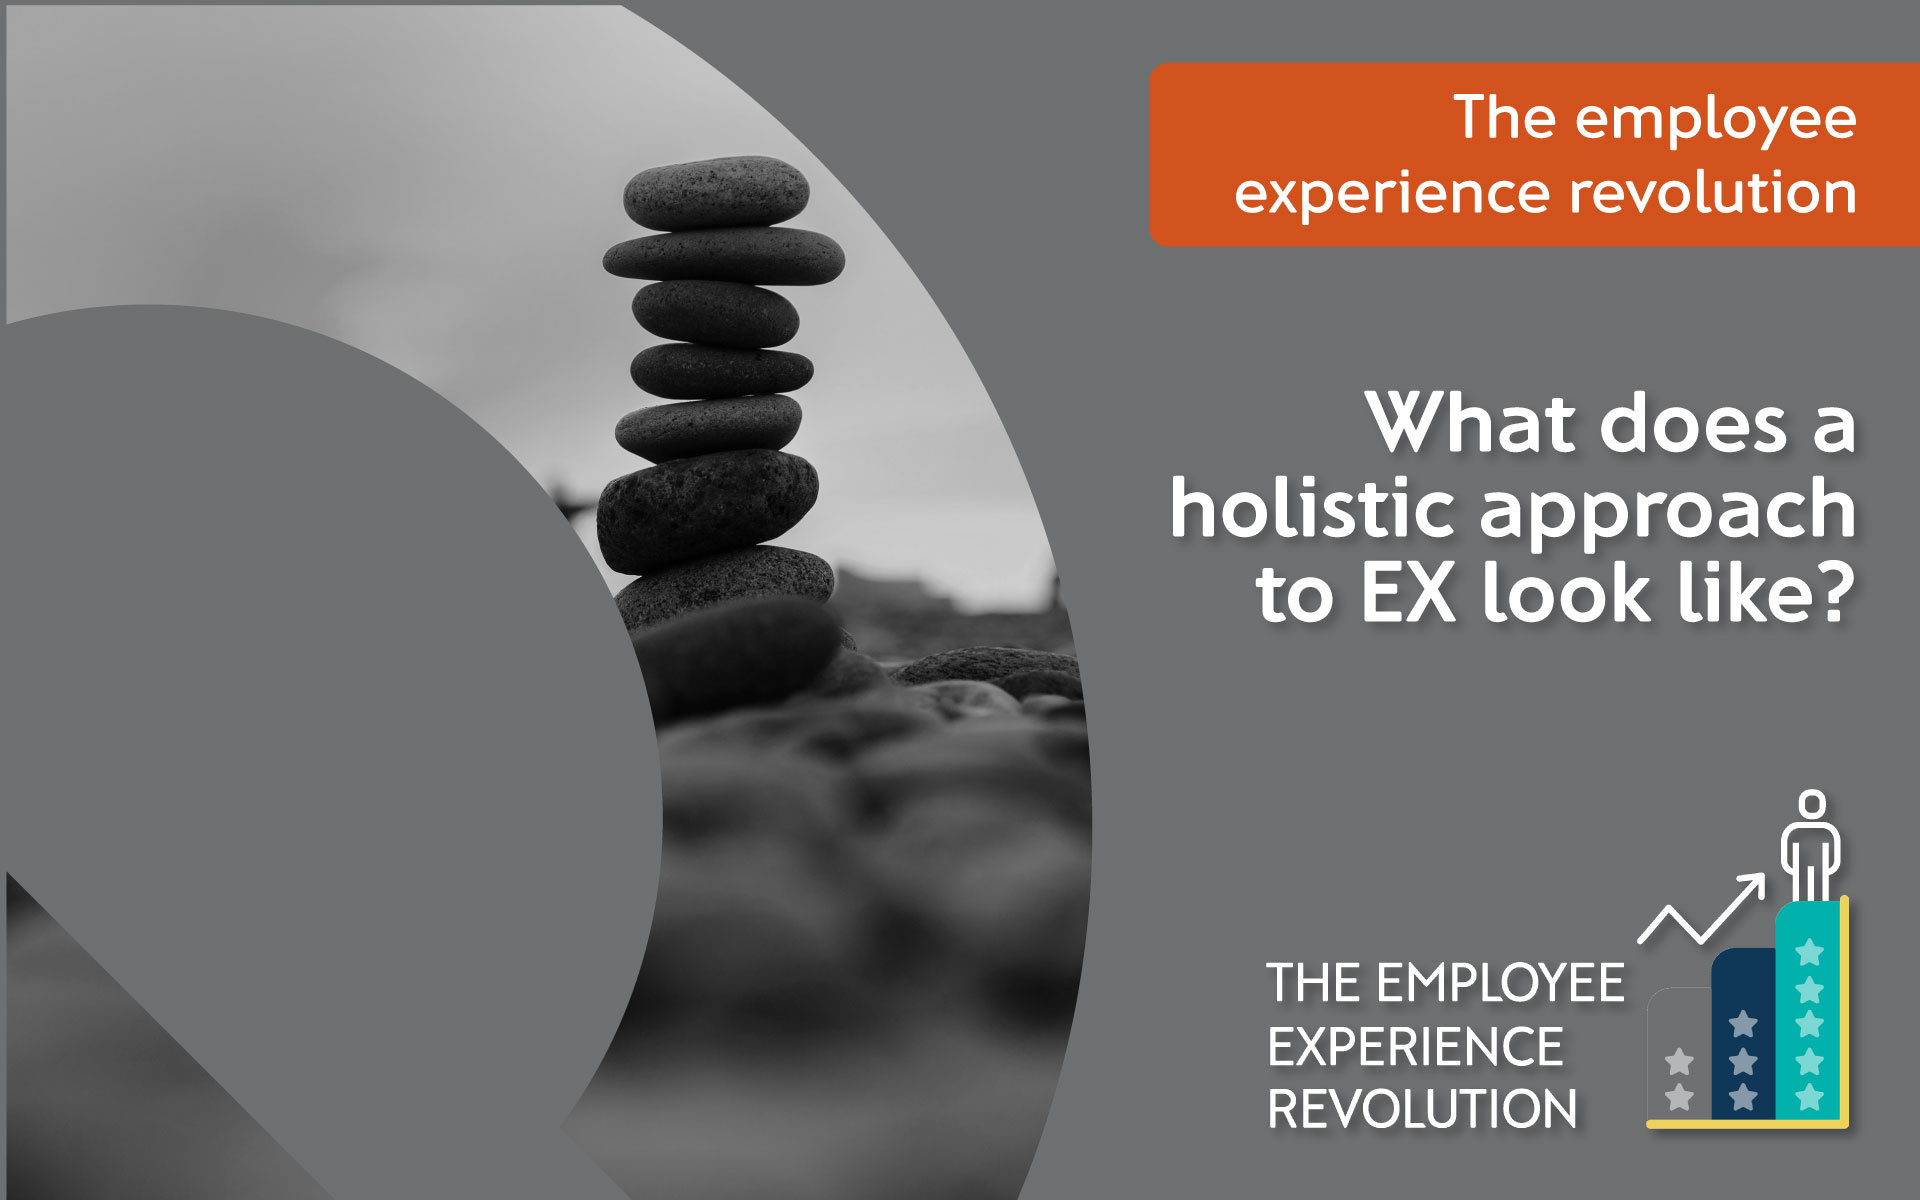 EX revolution - What does a holistic approach to EX look like?